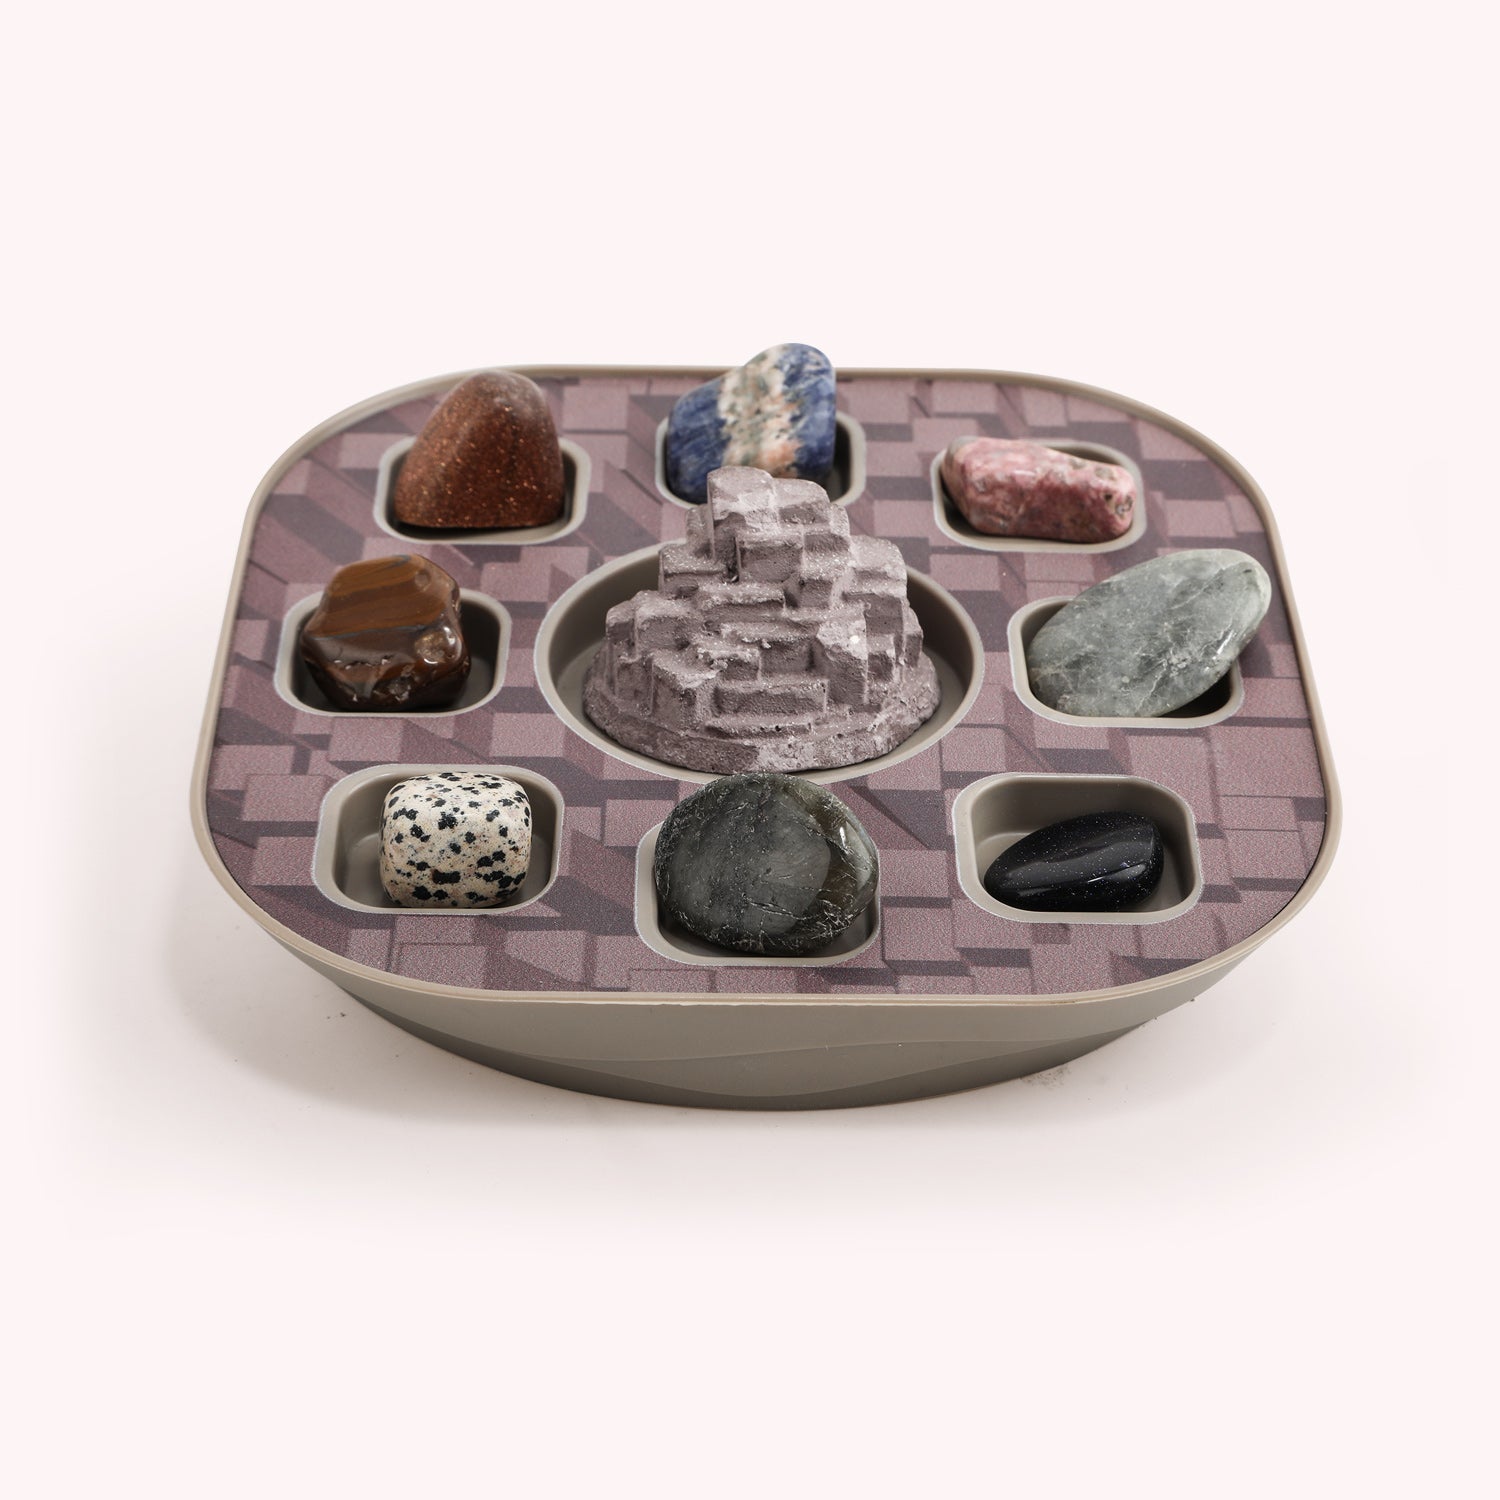 Like a real geologist, kids dig up gemstones, analyse them by colour, transparency, shine, and document their finds. Once they have found all eight gems, they can present their collection of gems on the back of the base.